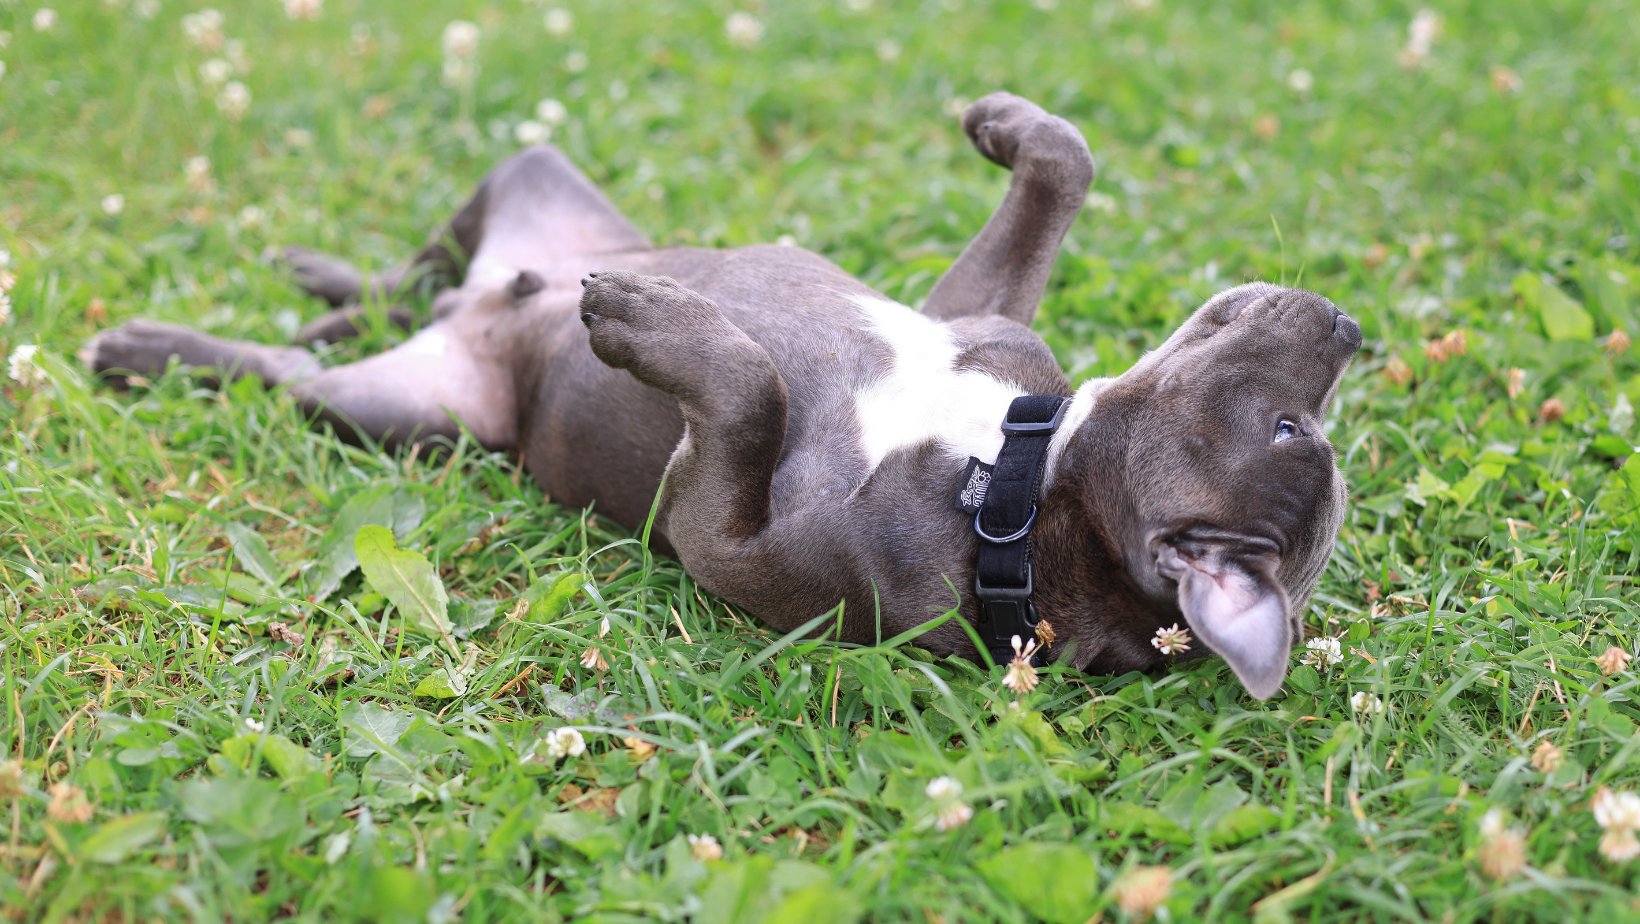 Why Do Dogs Roll in the Grass?